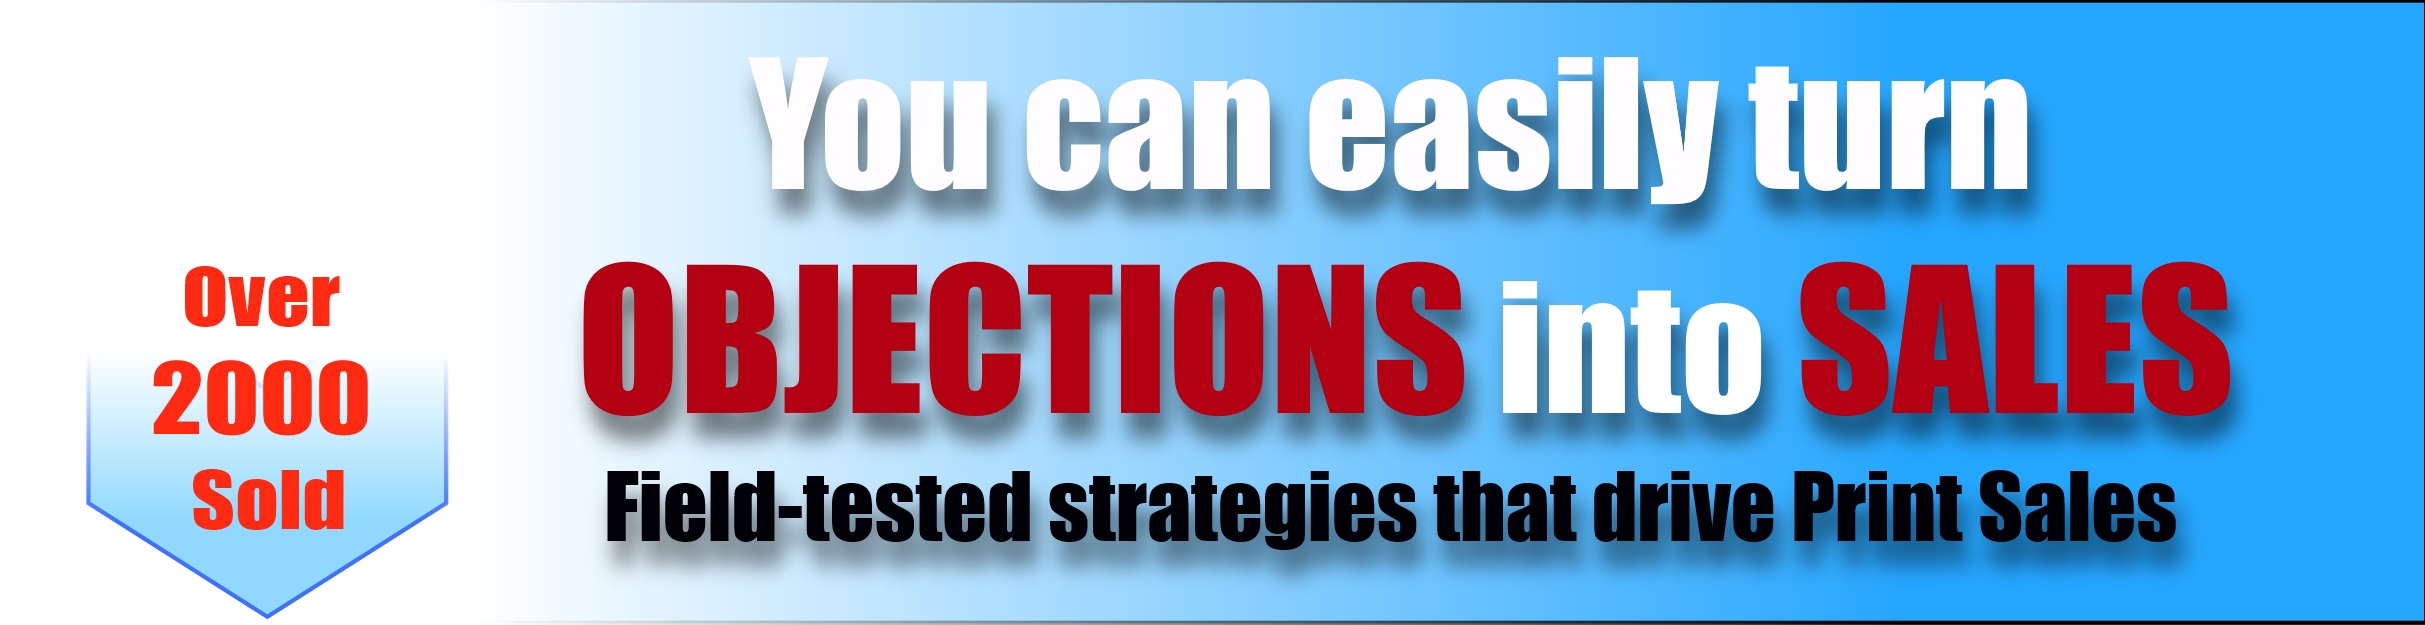 Turn objections into sales